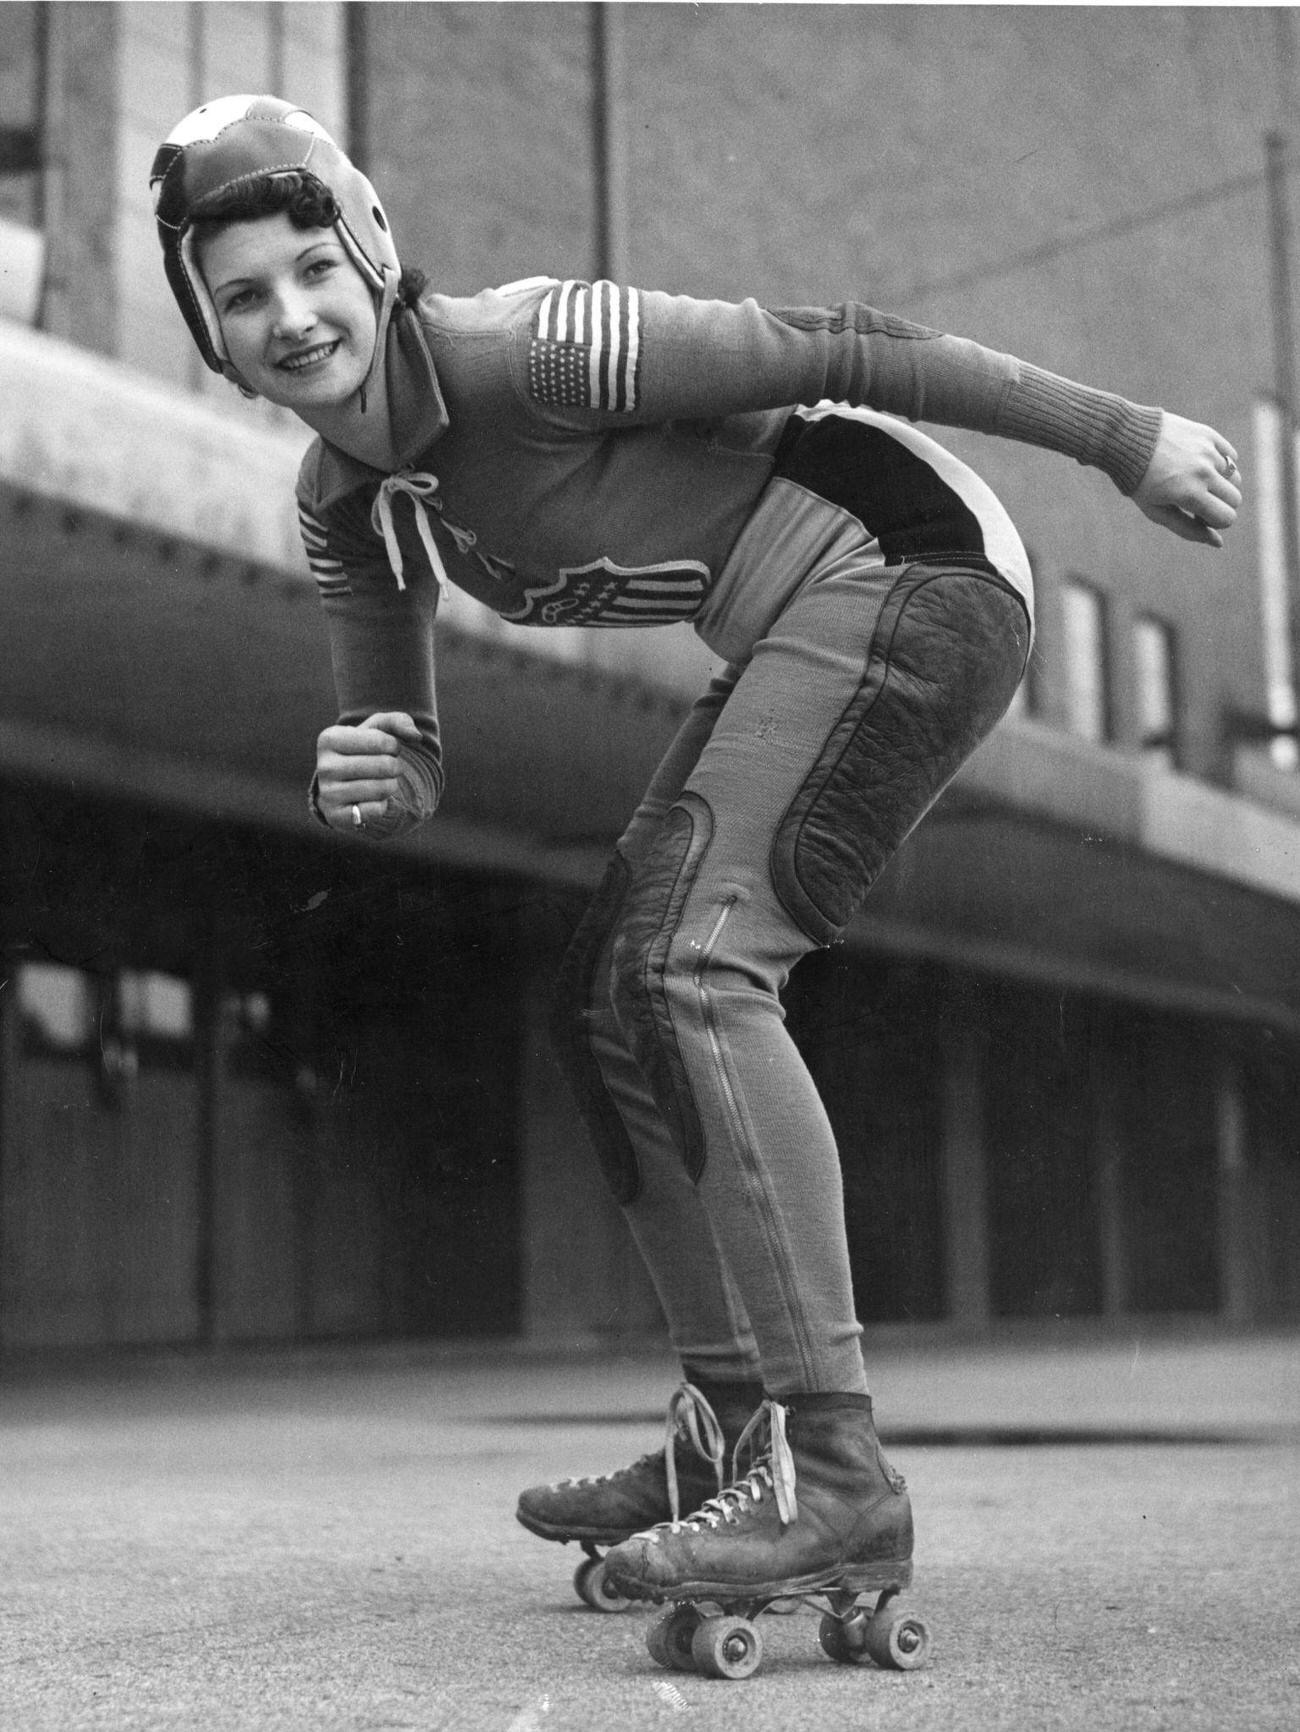 Protected Speedway Roller Skater at Harringay Arena, London, 1939.